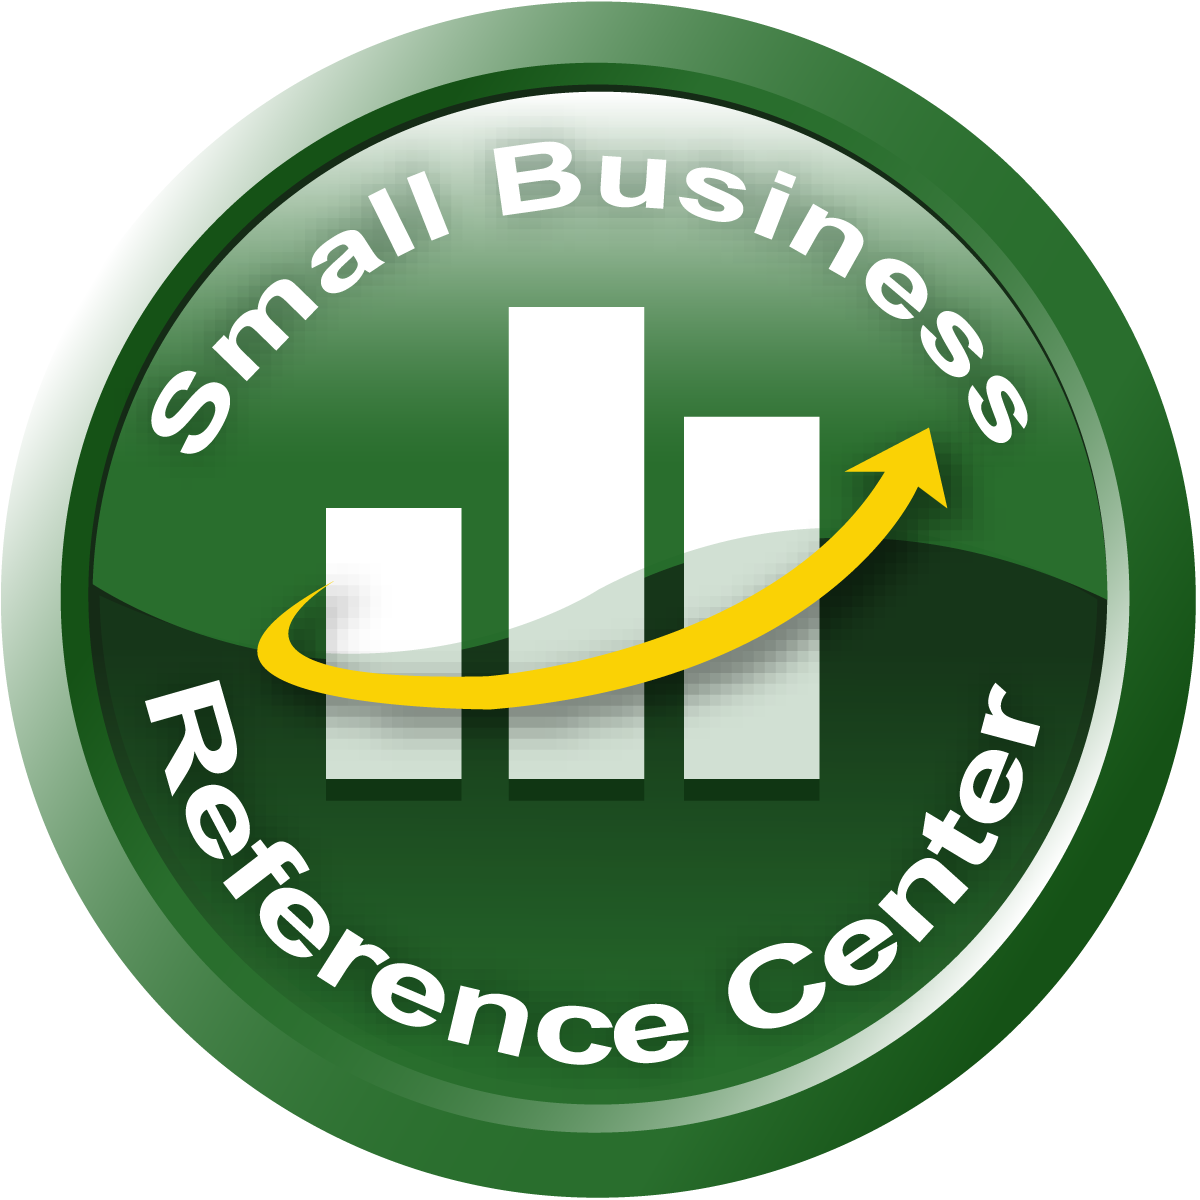 Small Business Reference Center